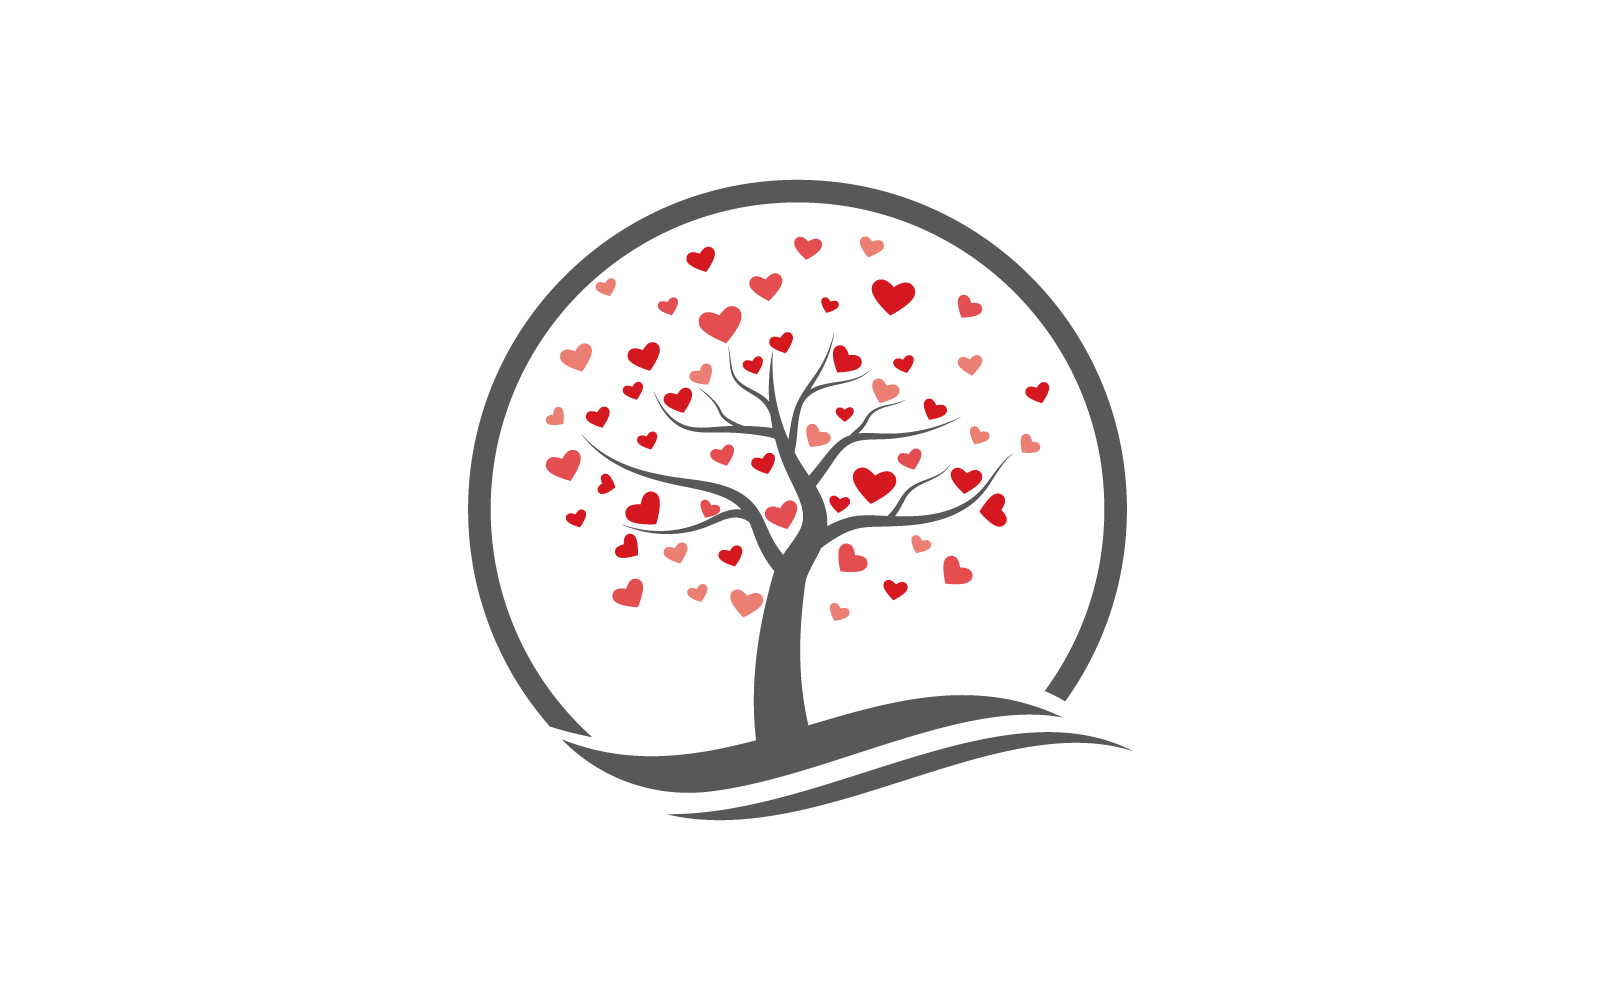 Love Tree Logo or Tree With Heart Leaves Logo Vector Design Logo Template